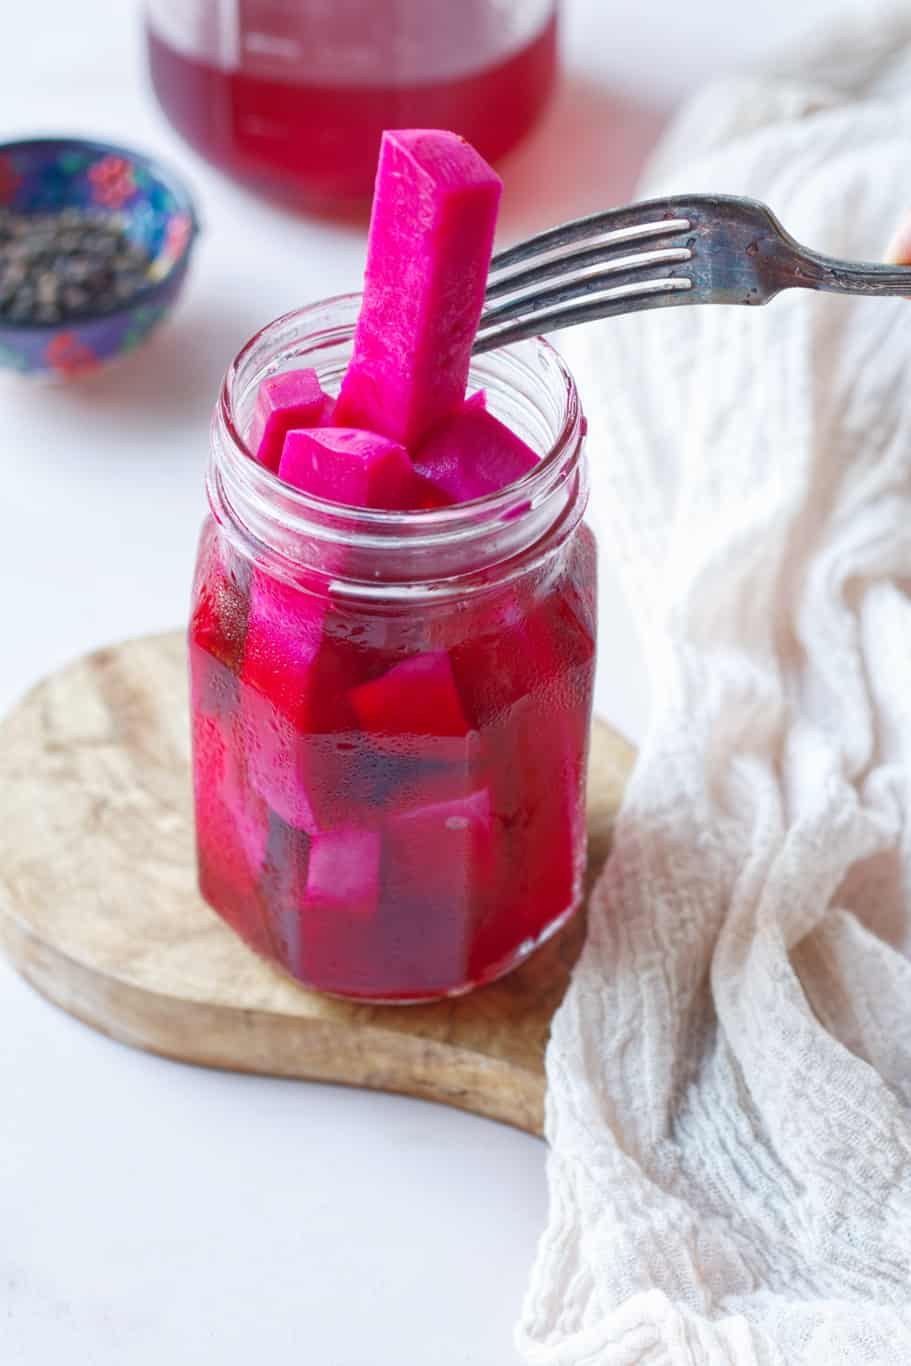 a refrigerator pickled turnips having wonderful pink color and perfectly crunchy texture